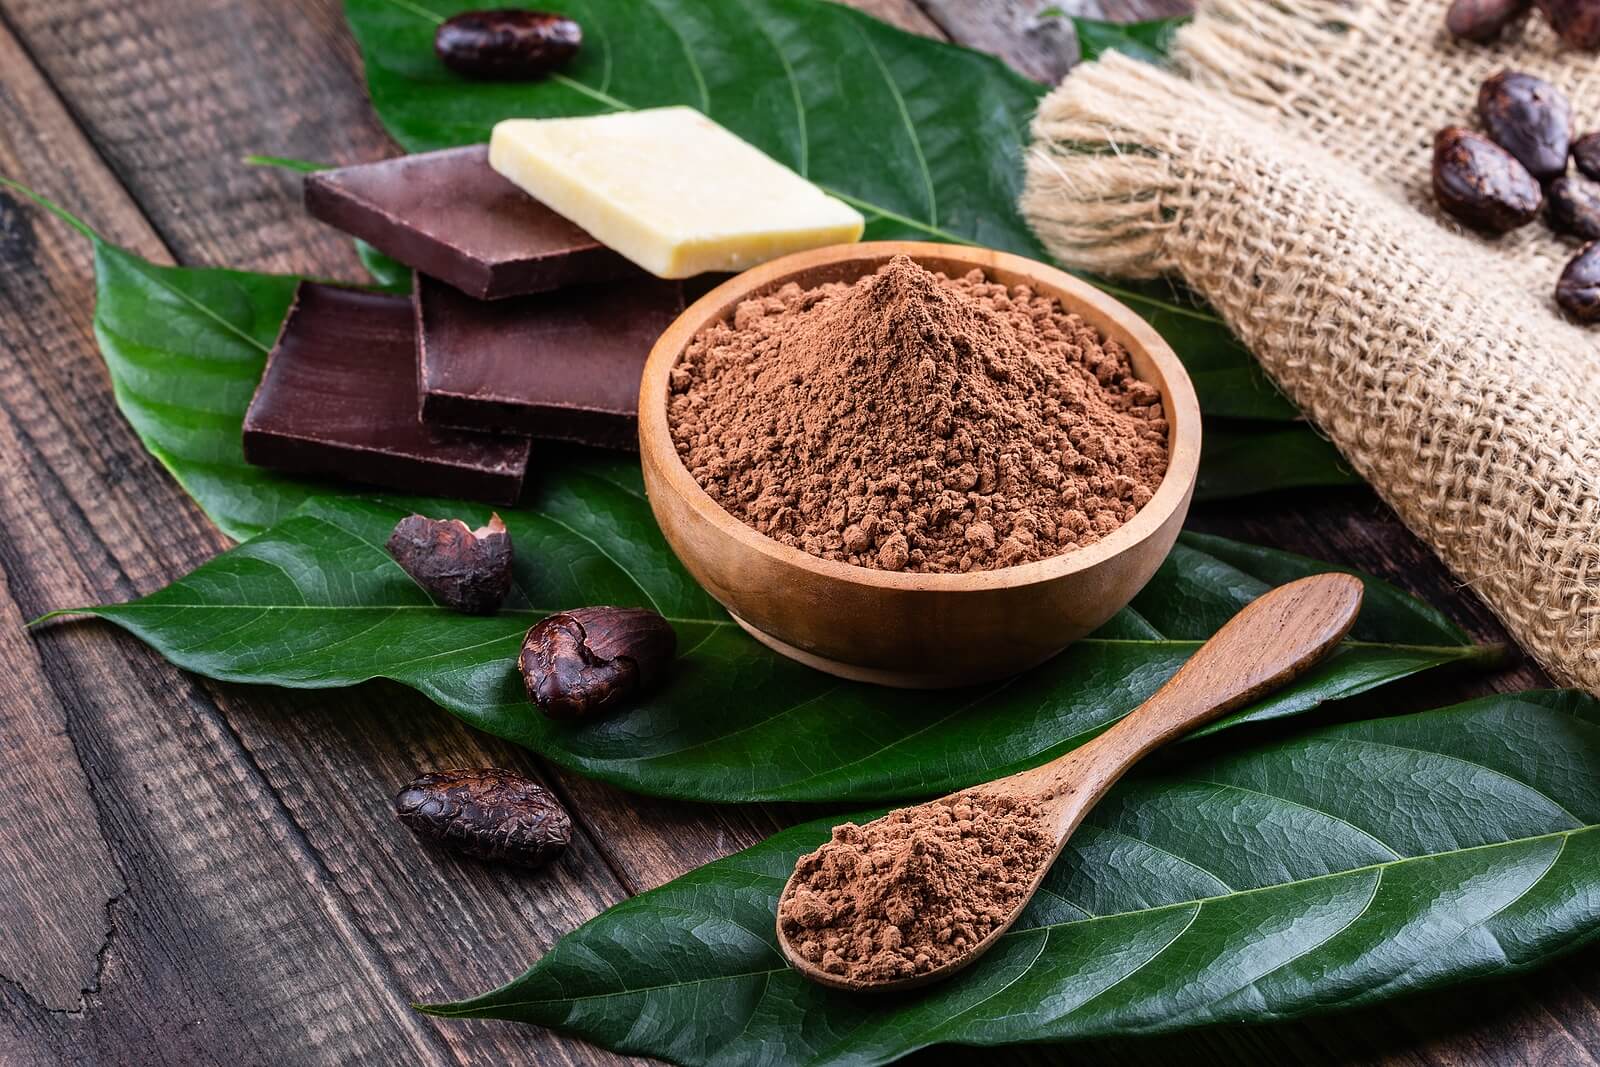 Cocoa has many benefits for children.